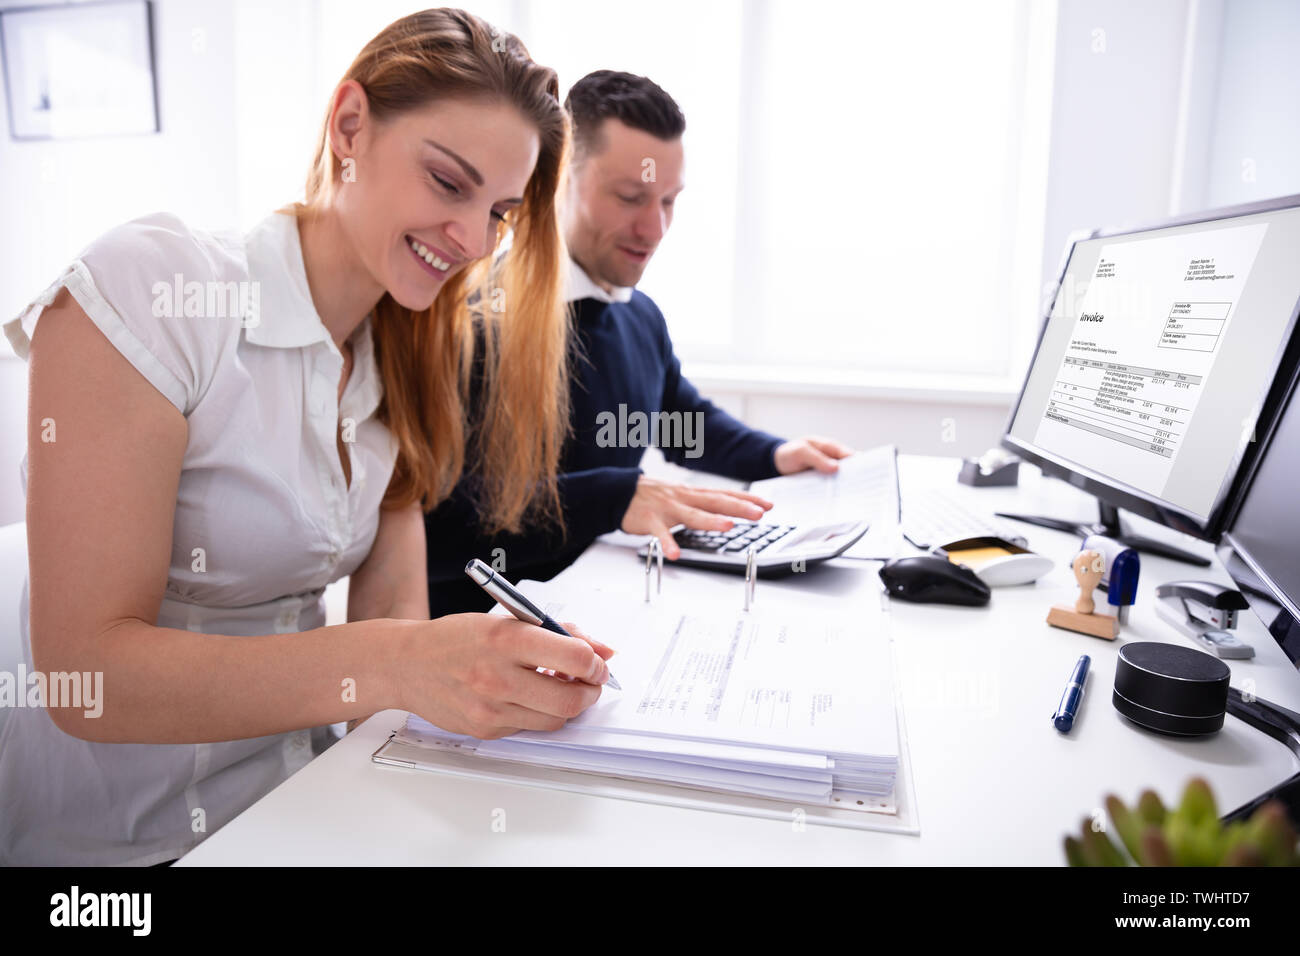 Side View Of Two Businesspeople Calculating Invoice With Calculator On Desk At Workplace Stock Photo